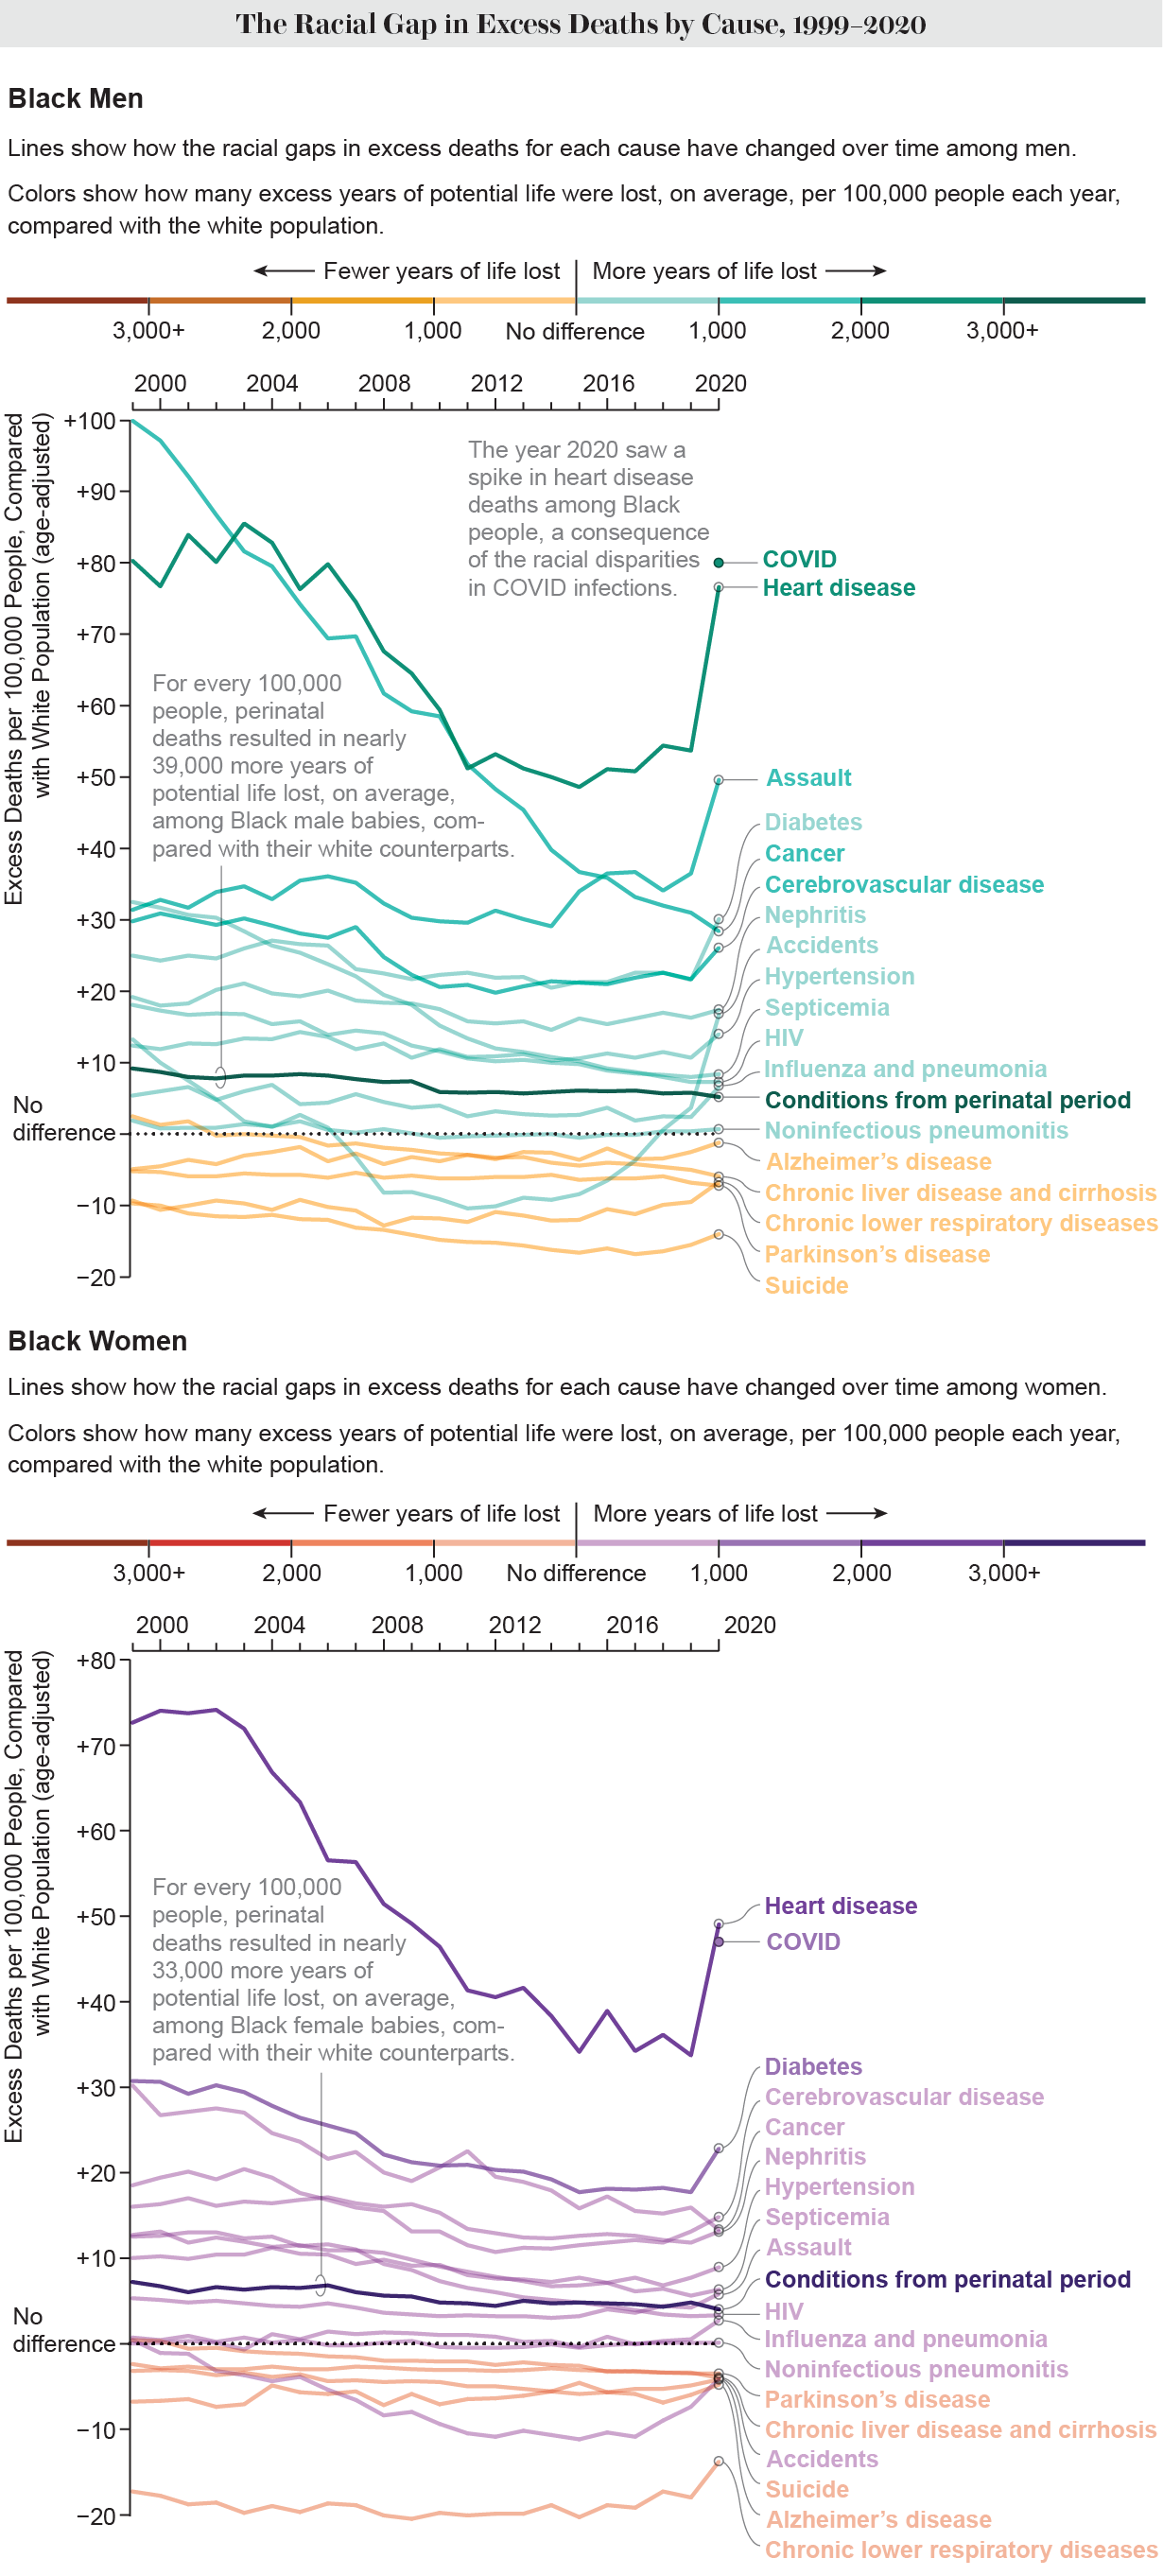 Line charts show excess death rates among Black men and women by cause, compared with their white counterparts, from 1999 to 2020. Lines are color coded to show years of potential life lost, on average, per 100,000 people each year for each cause of death.